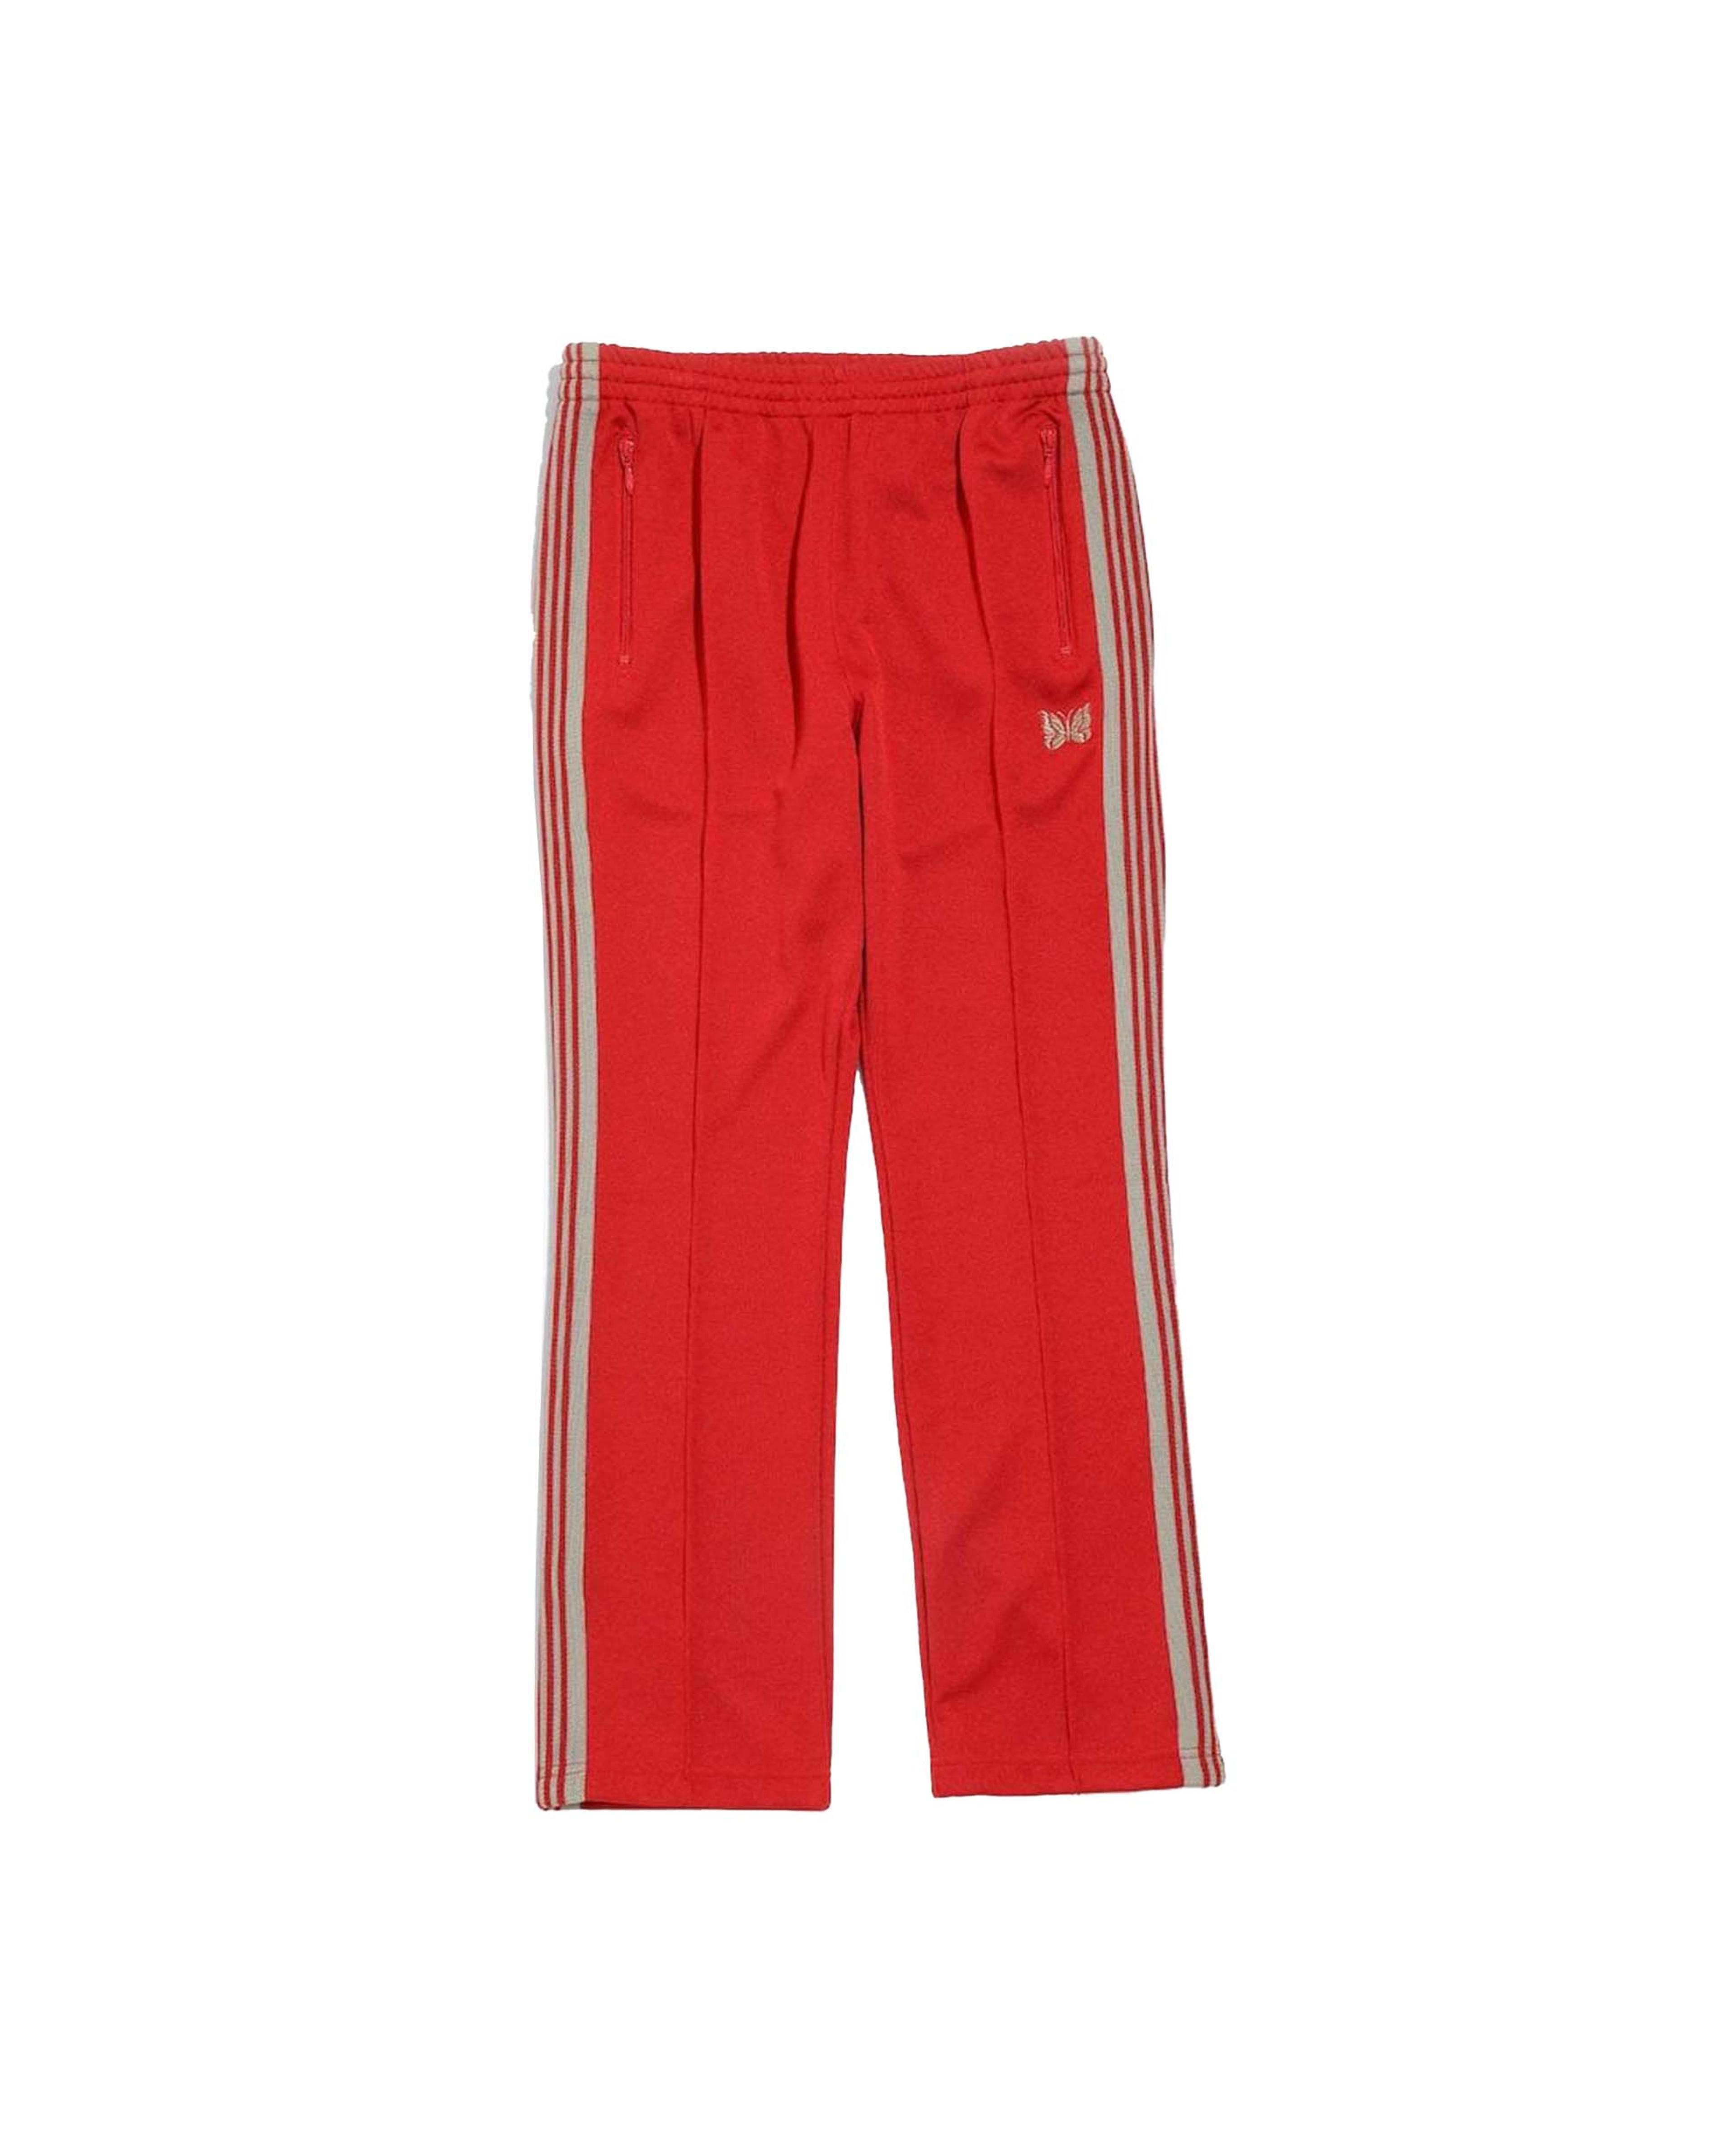 Alternate View 2 of Needles Narrow Track Pants- Poly Smooth